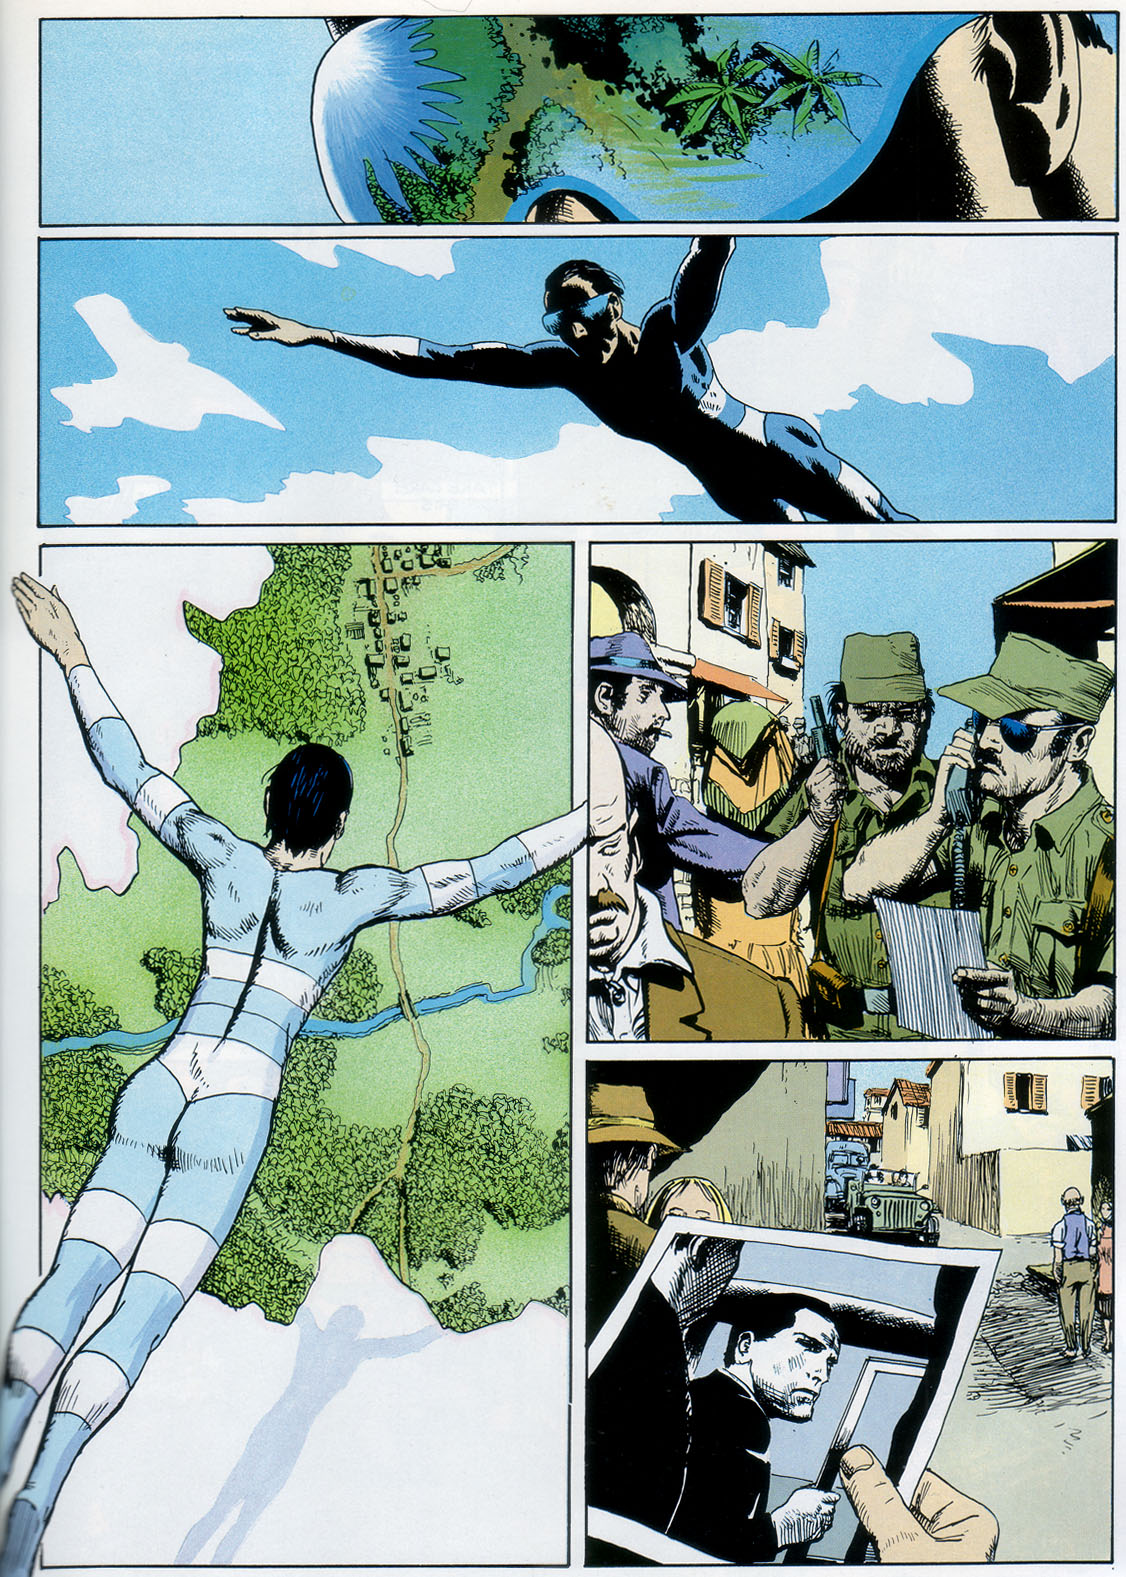 Marvel Graphic Novel issue 57 - Rick Mason - The Agent - Page 49